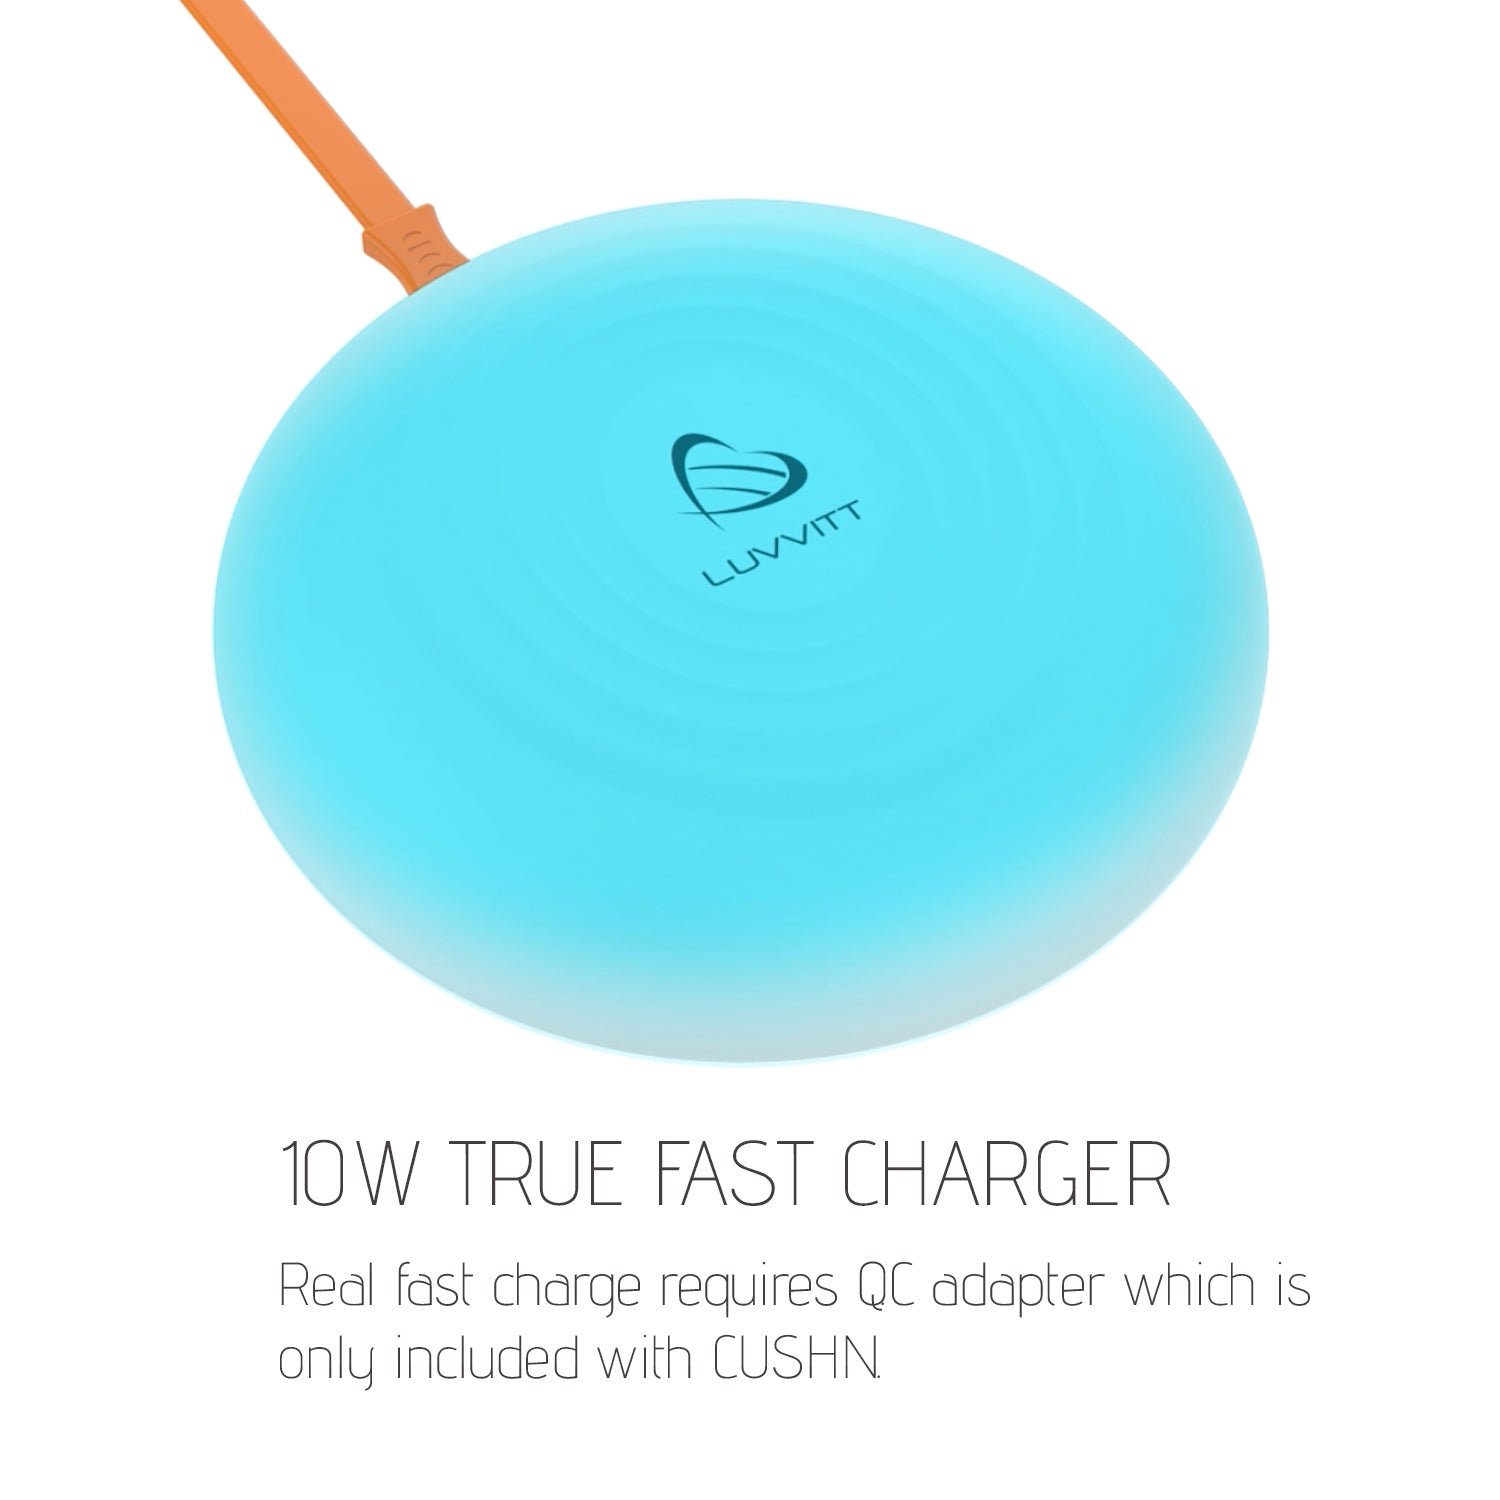 Luvvitt CUSHN Fast Charge Wireless Charger for iPhone XS Max / XR / X / 8 / Plus